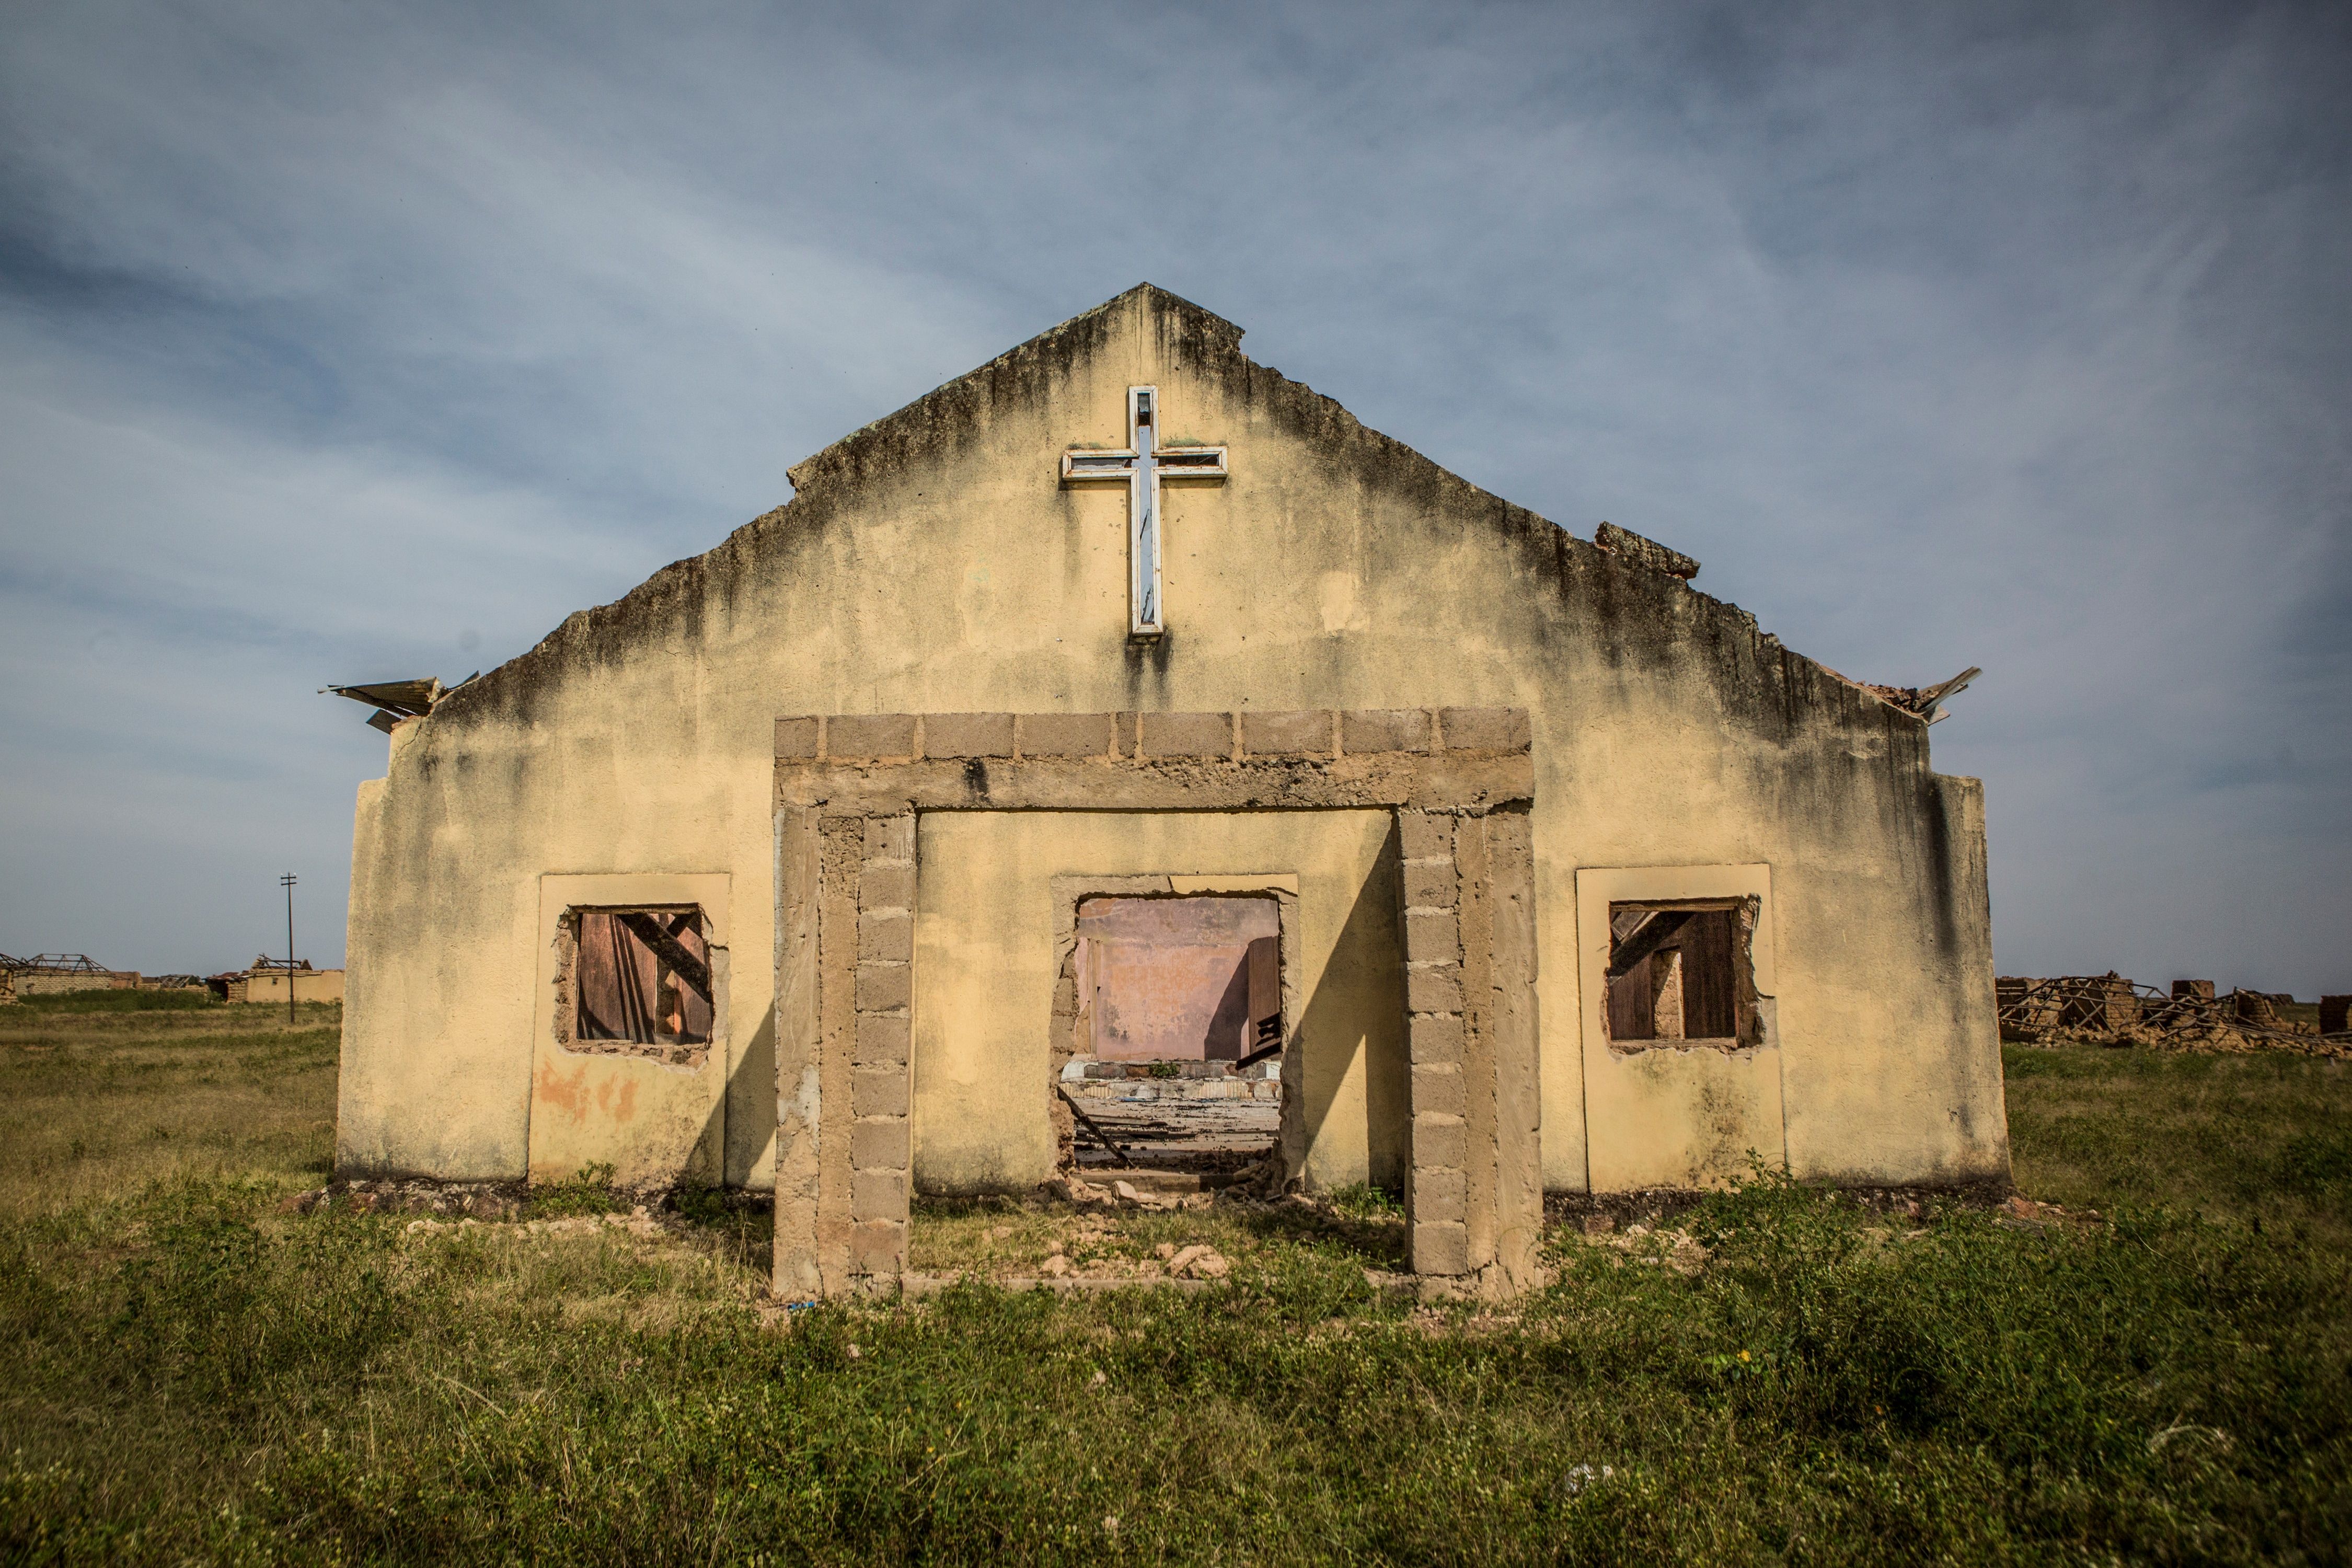 This church in the plateau village of Garwaza was raided and burned in an attack by armed men in June. Image by Jane Hahn. Nigeria, 2018.